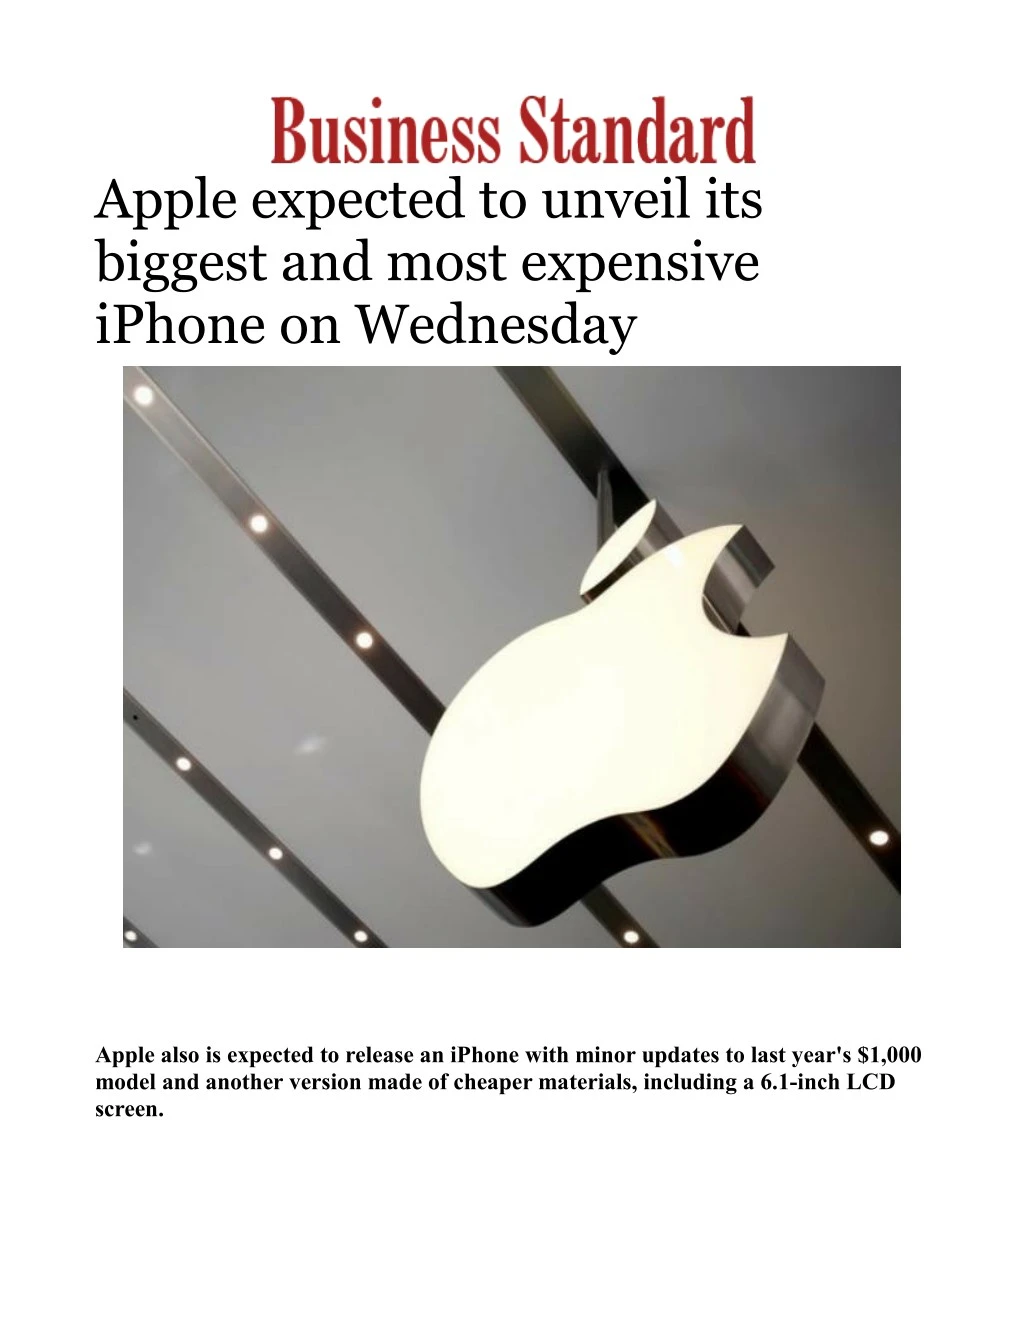 apple expected to unveil its biggest and most